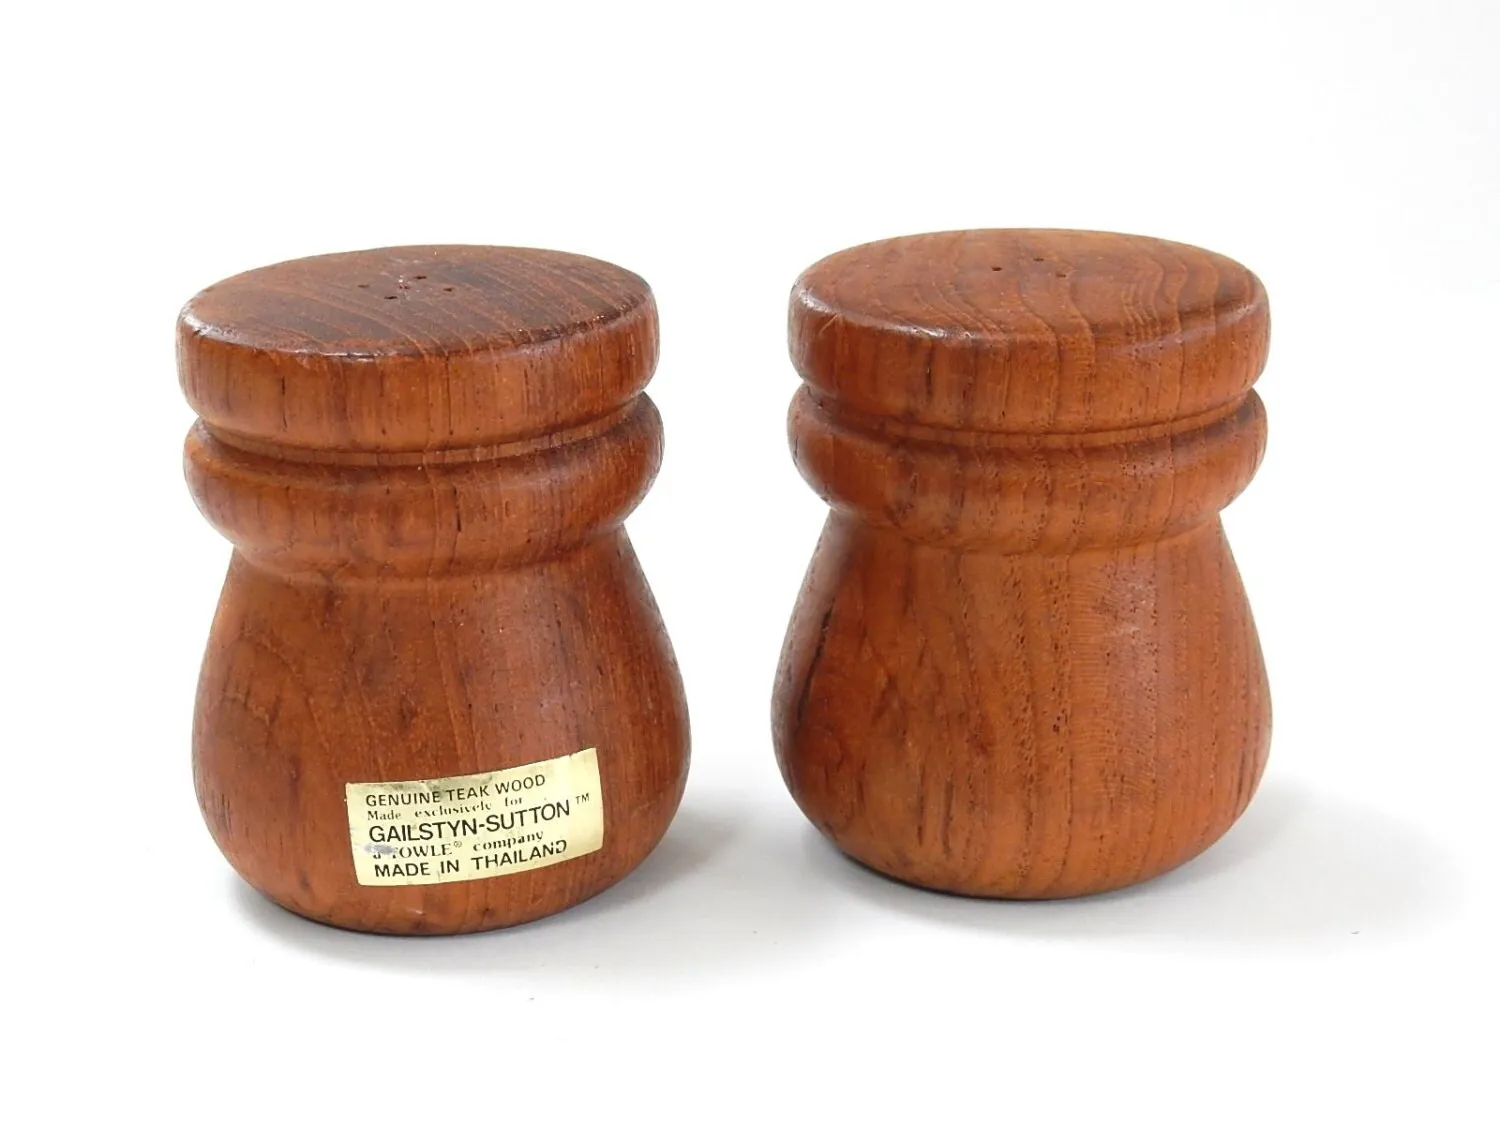 Where Are Gailstyn Salt And Pepper Shakers Made?